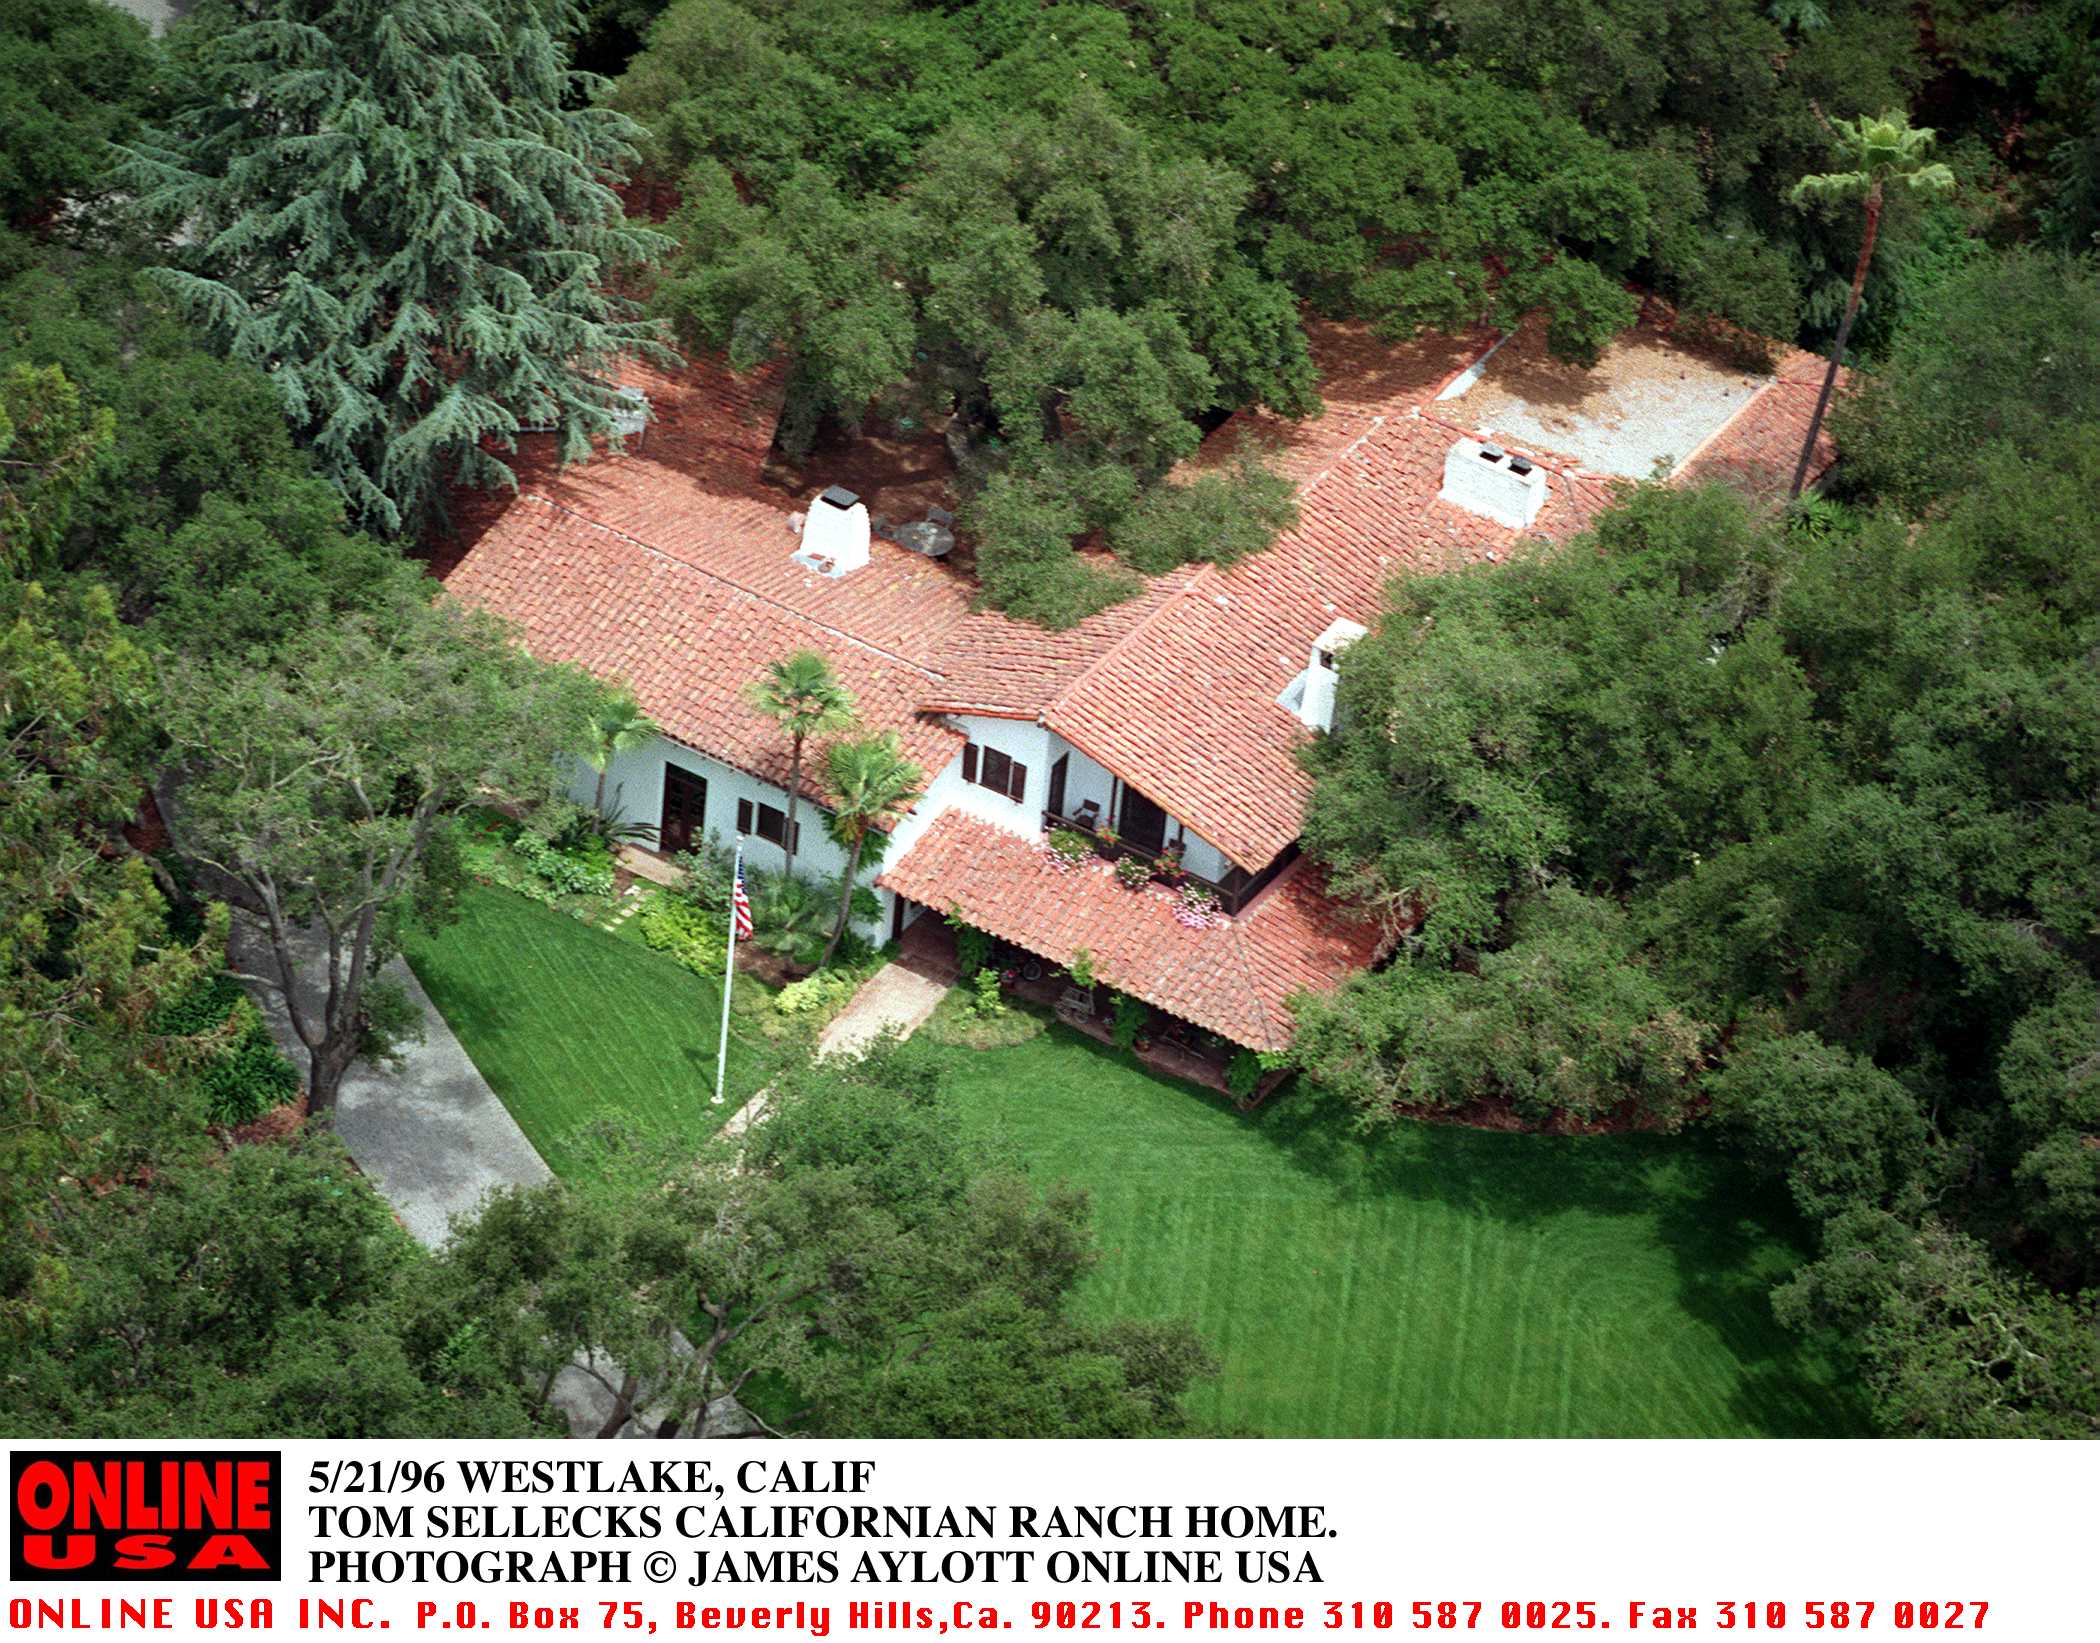 Tom Selleck's Westlake, California ranch home photographed on May 21, 1995 | Source: Getty Images